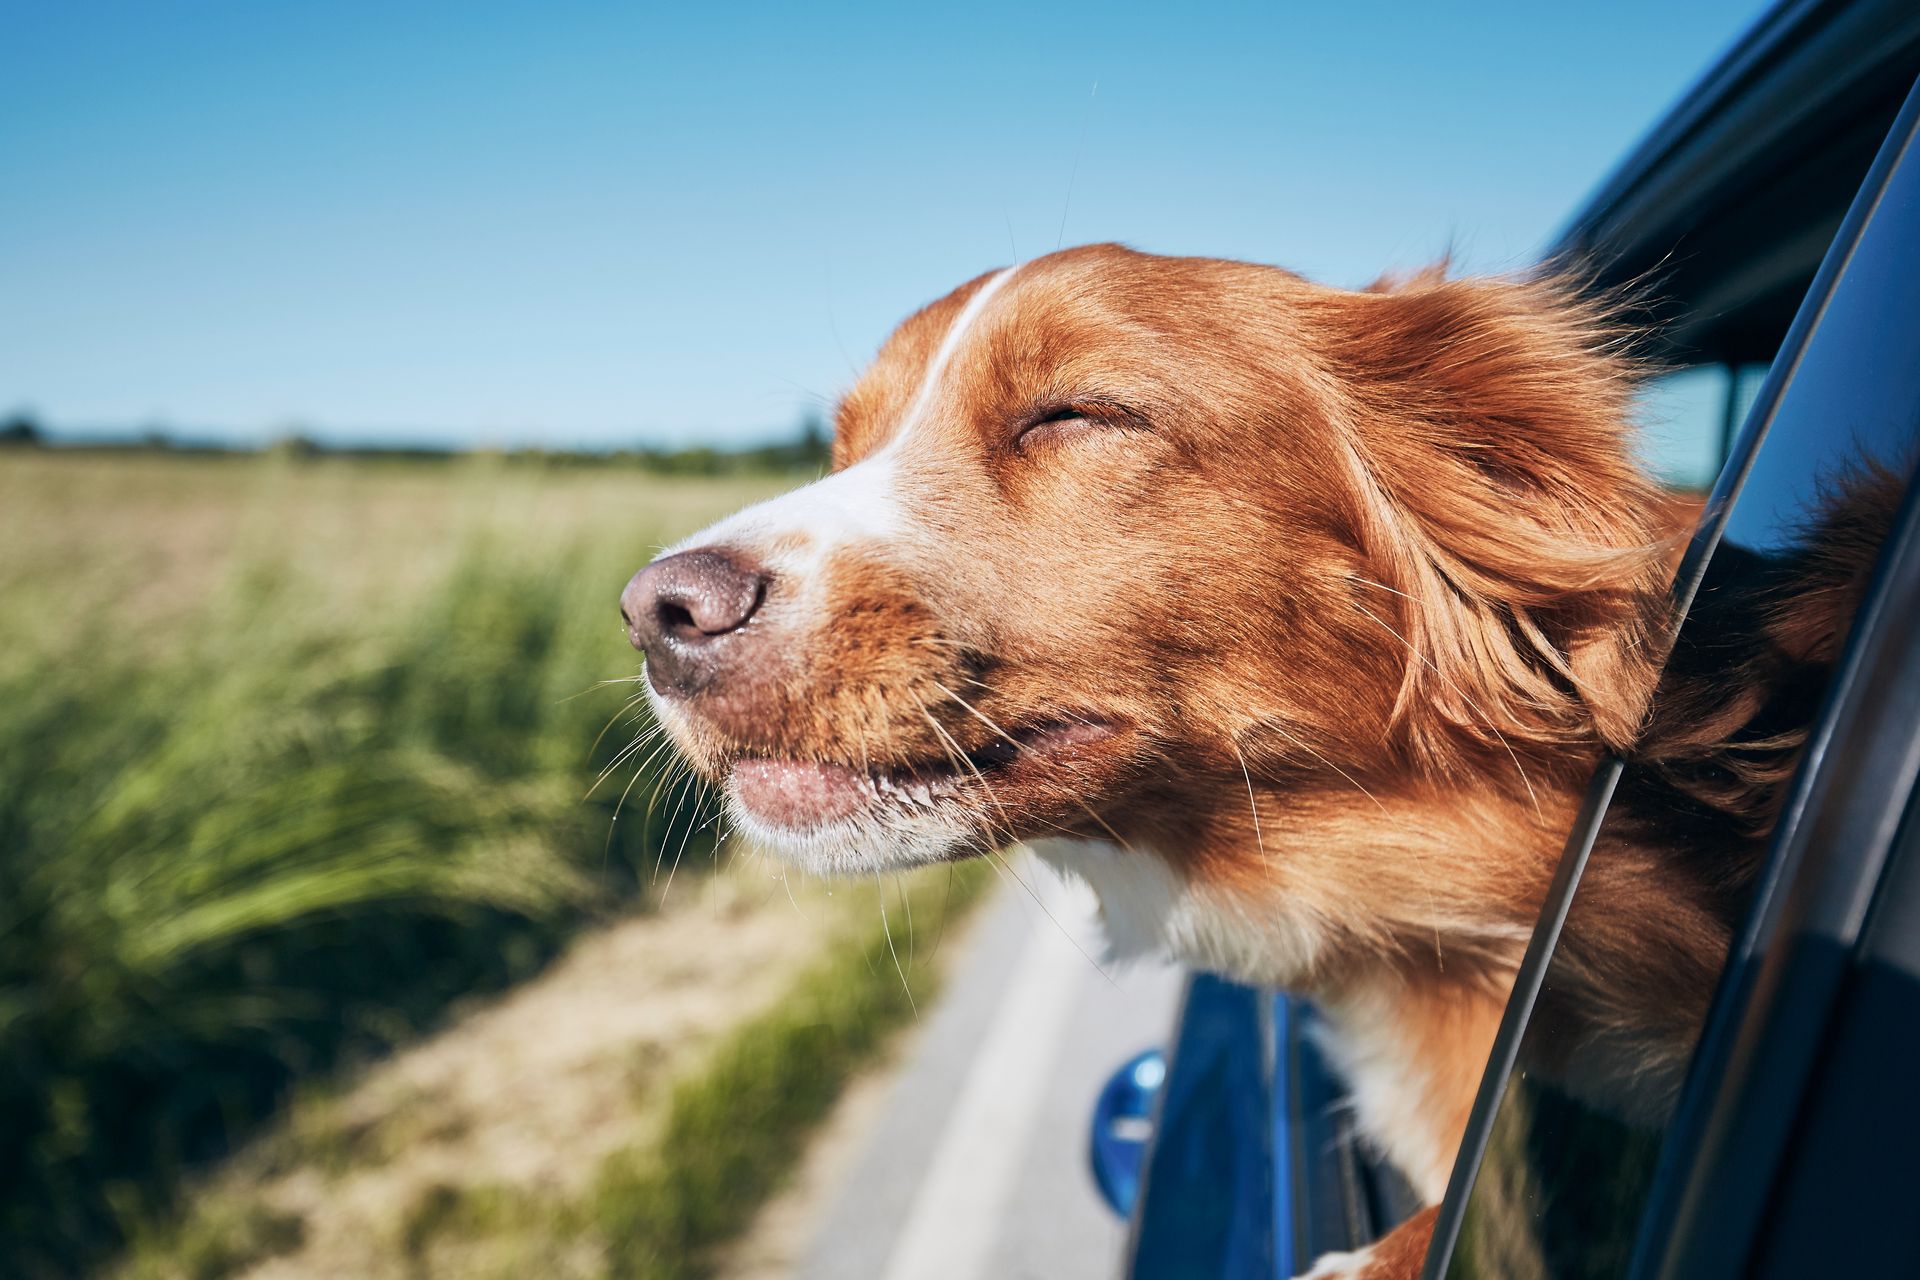 A dog is sticking its head out of a car window.